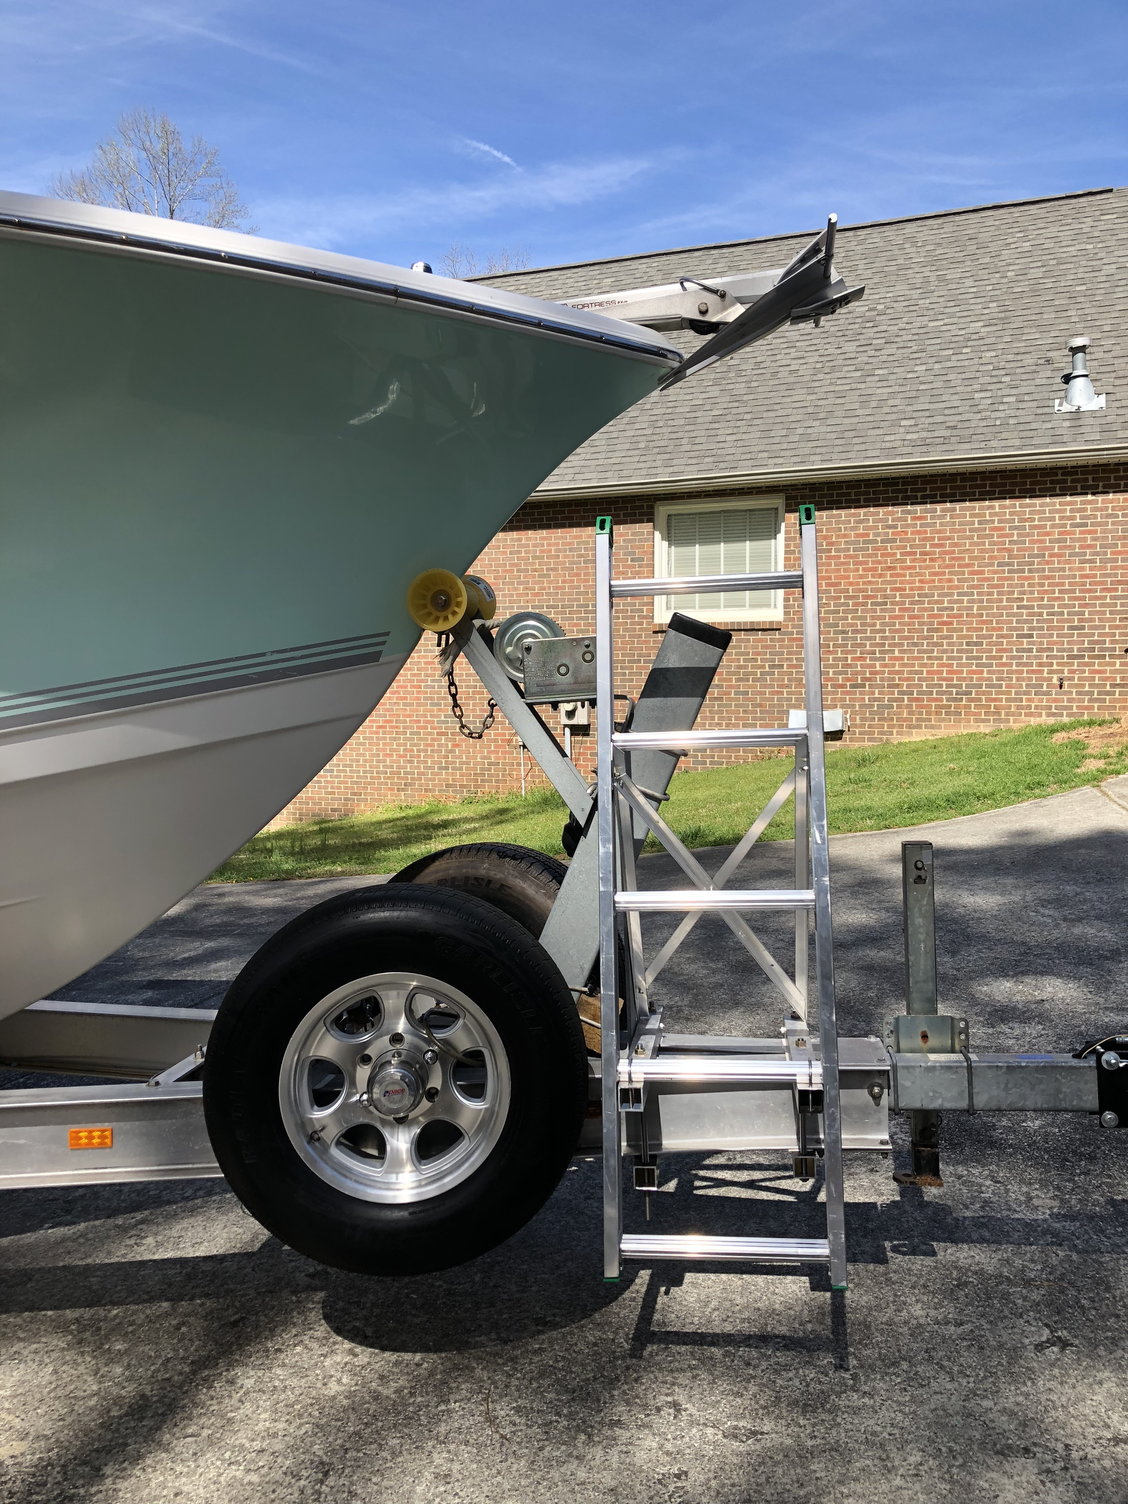 trailer frame mounted ladders for getting into the boat - The Hull Truth -  Boating and Fishing Forum